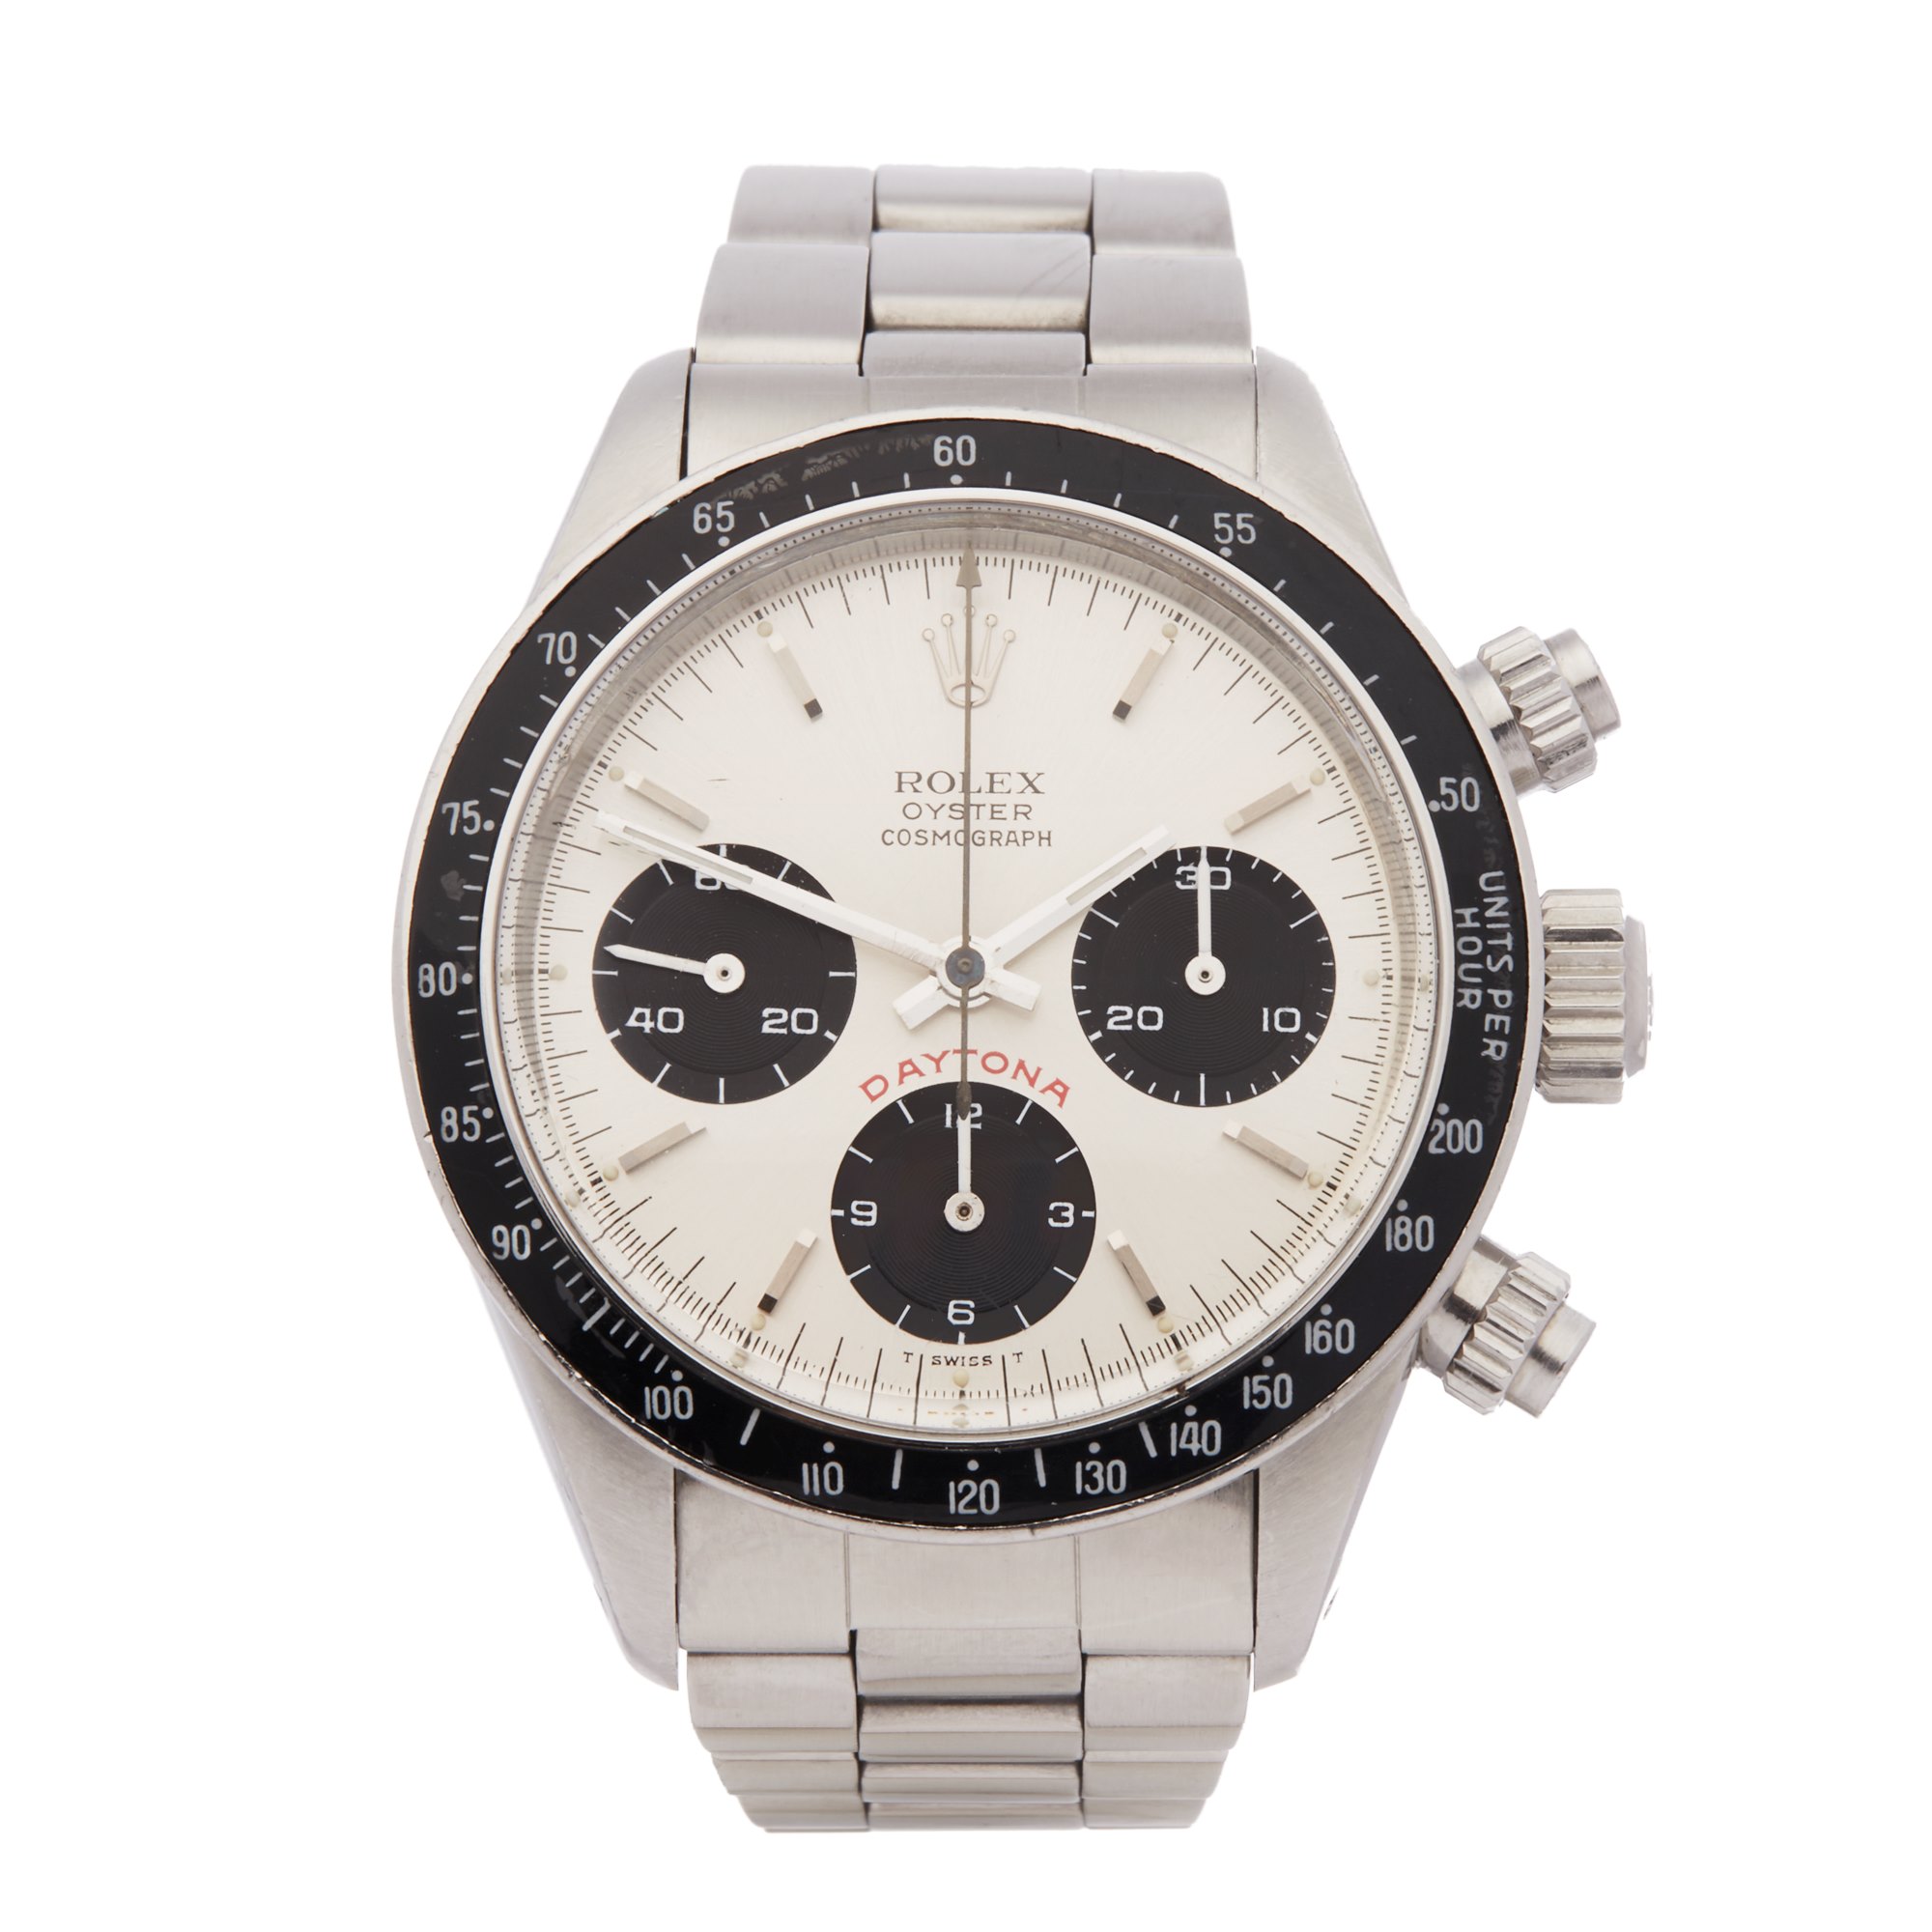 Pre-owned Rolex Watch Daytona 6263 | Xupes\